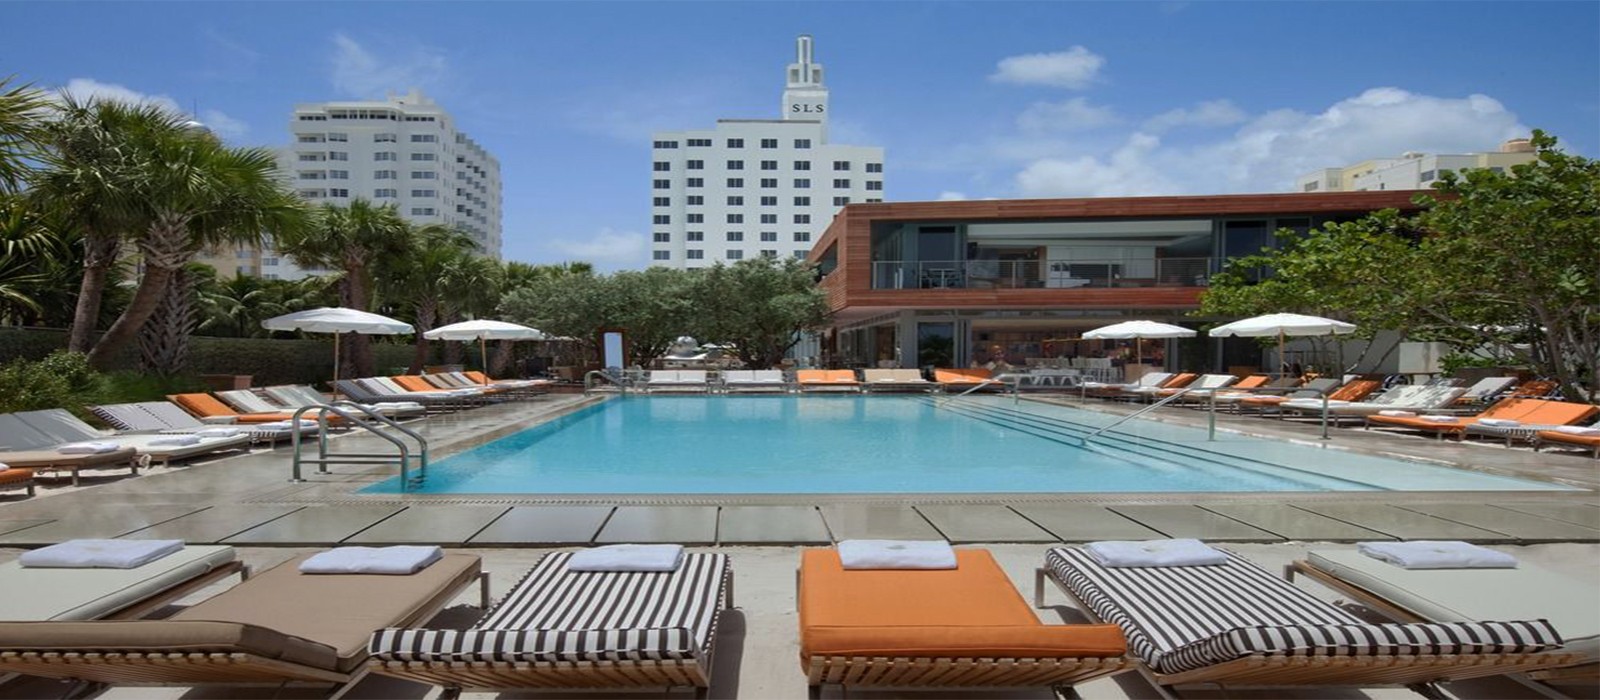 SLS South Beach - Luxury Miami holiday packages - header